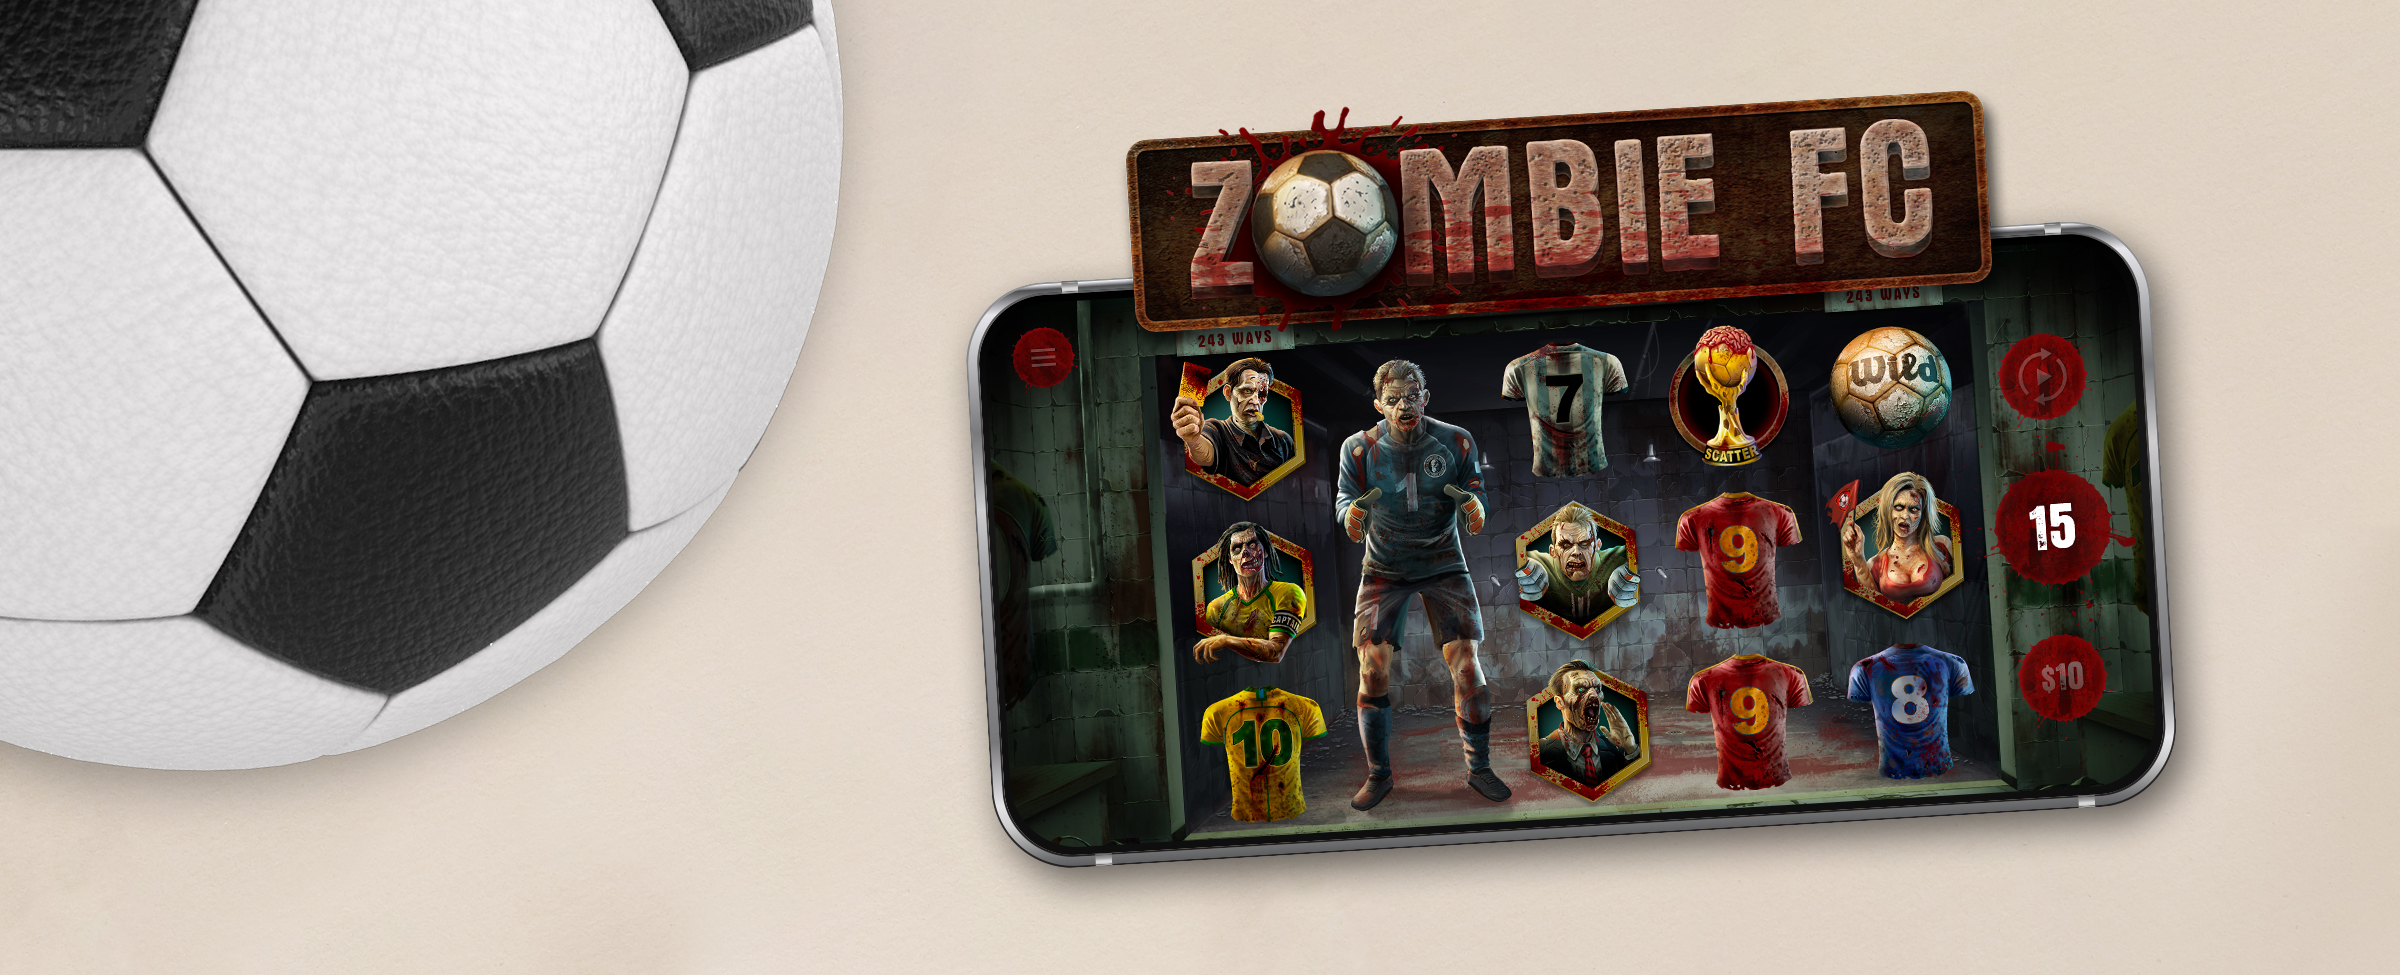 A mobile phone showing a screenshot of the Cafe Casino slot game, Zombie FC, is seen, featuring 3D-animated characters from the game. Just above the mobile screen is the Zombie FC logo, while to the left of the image, a soccer ball is shown entering from the top corner.